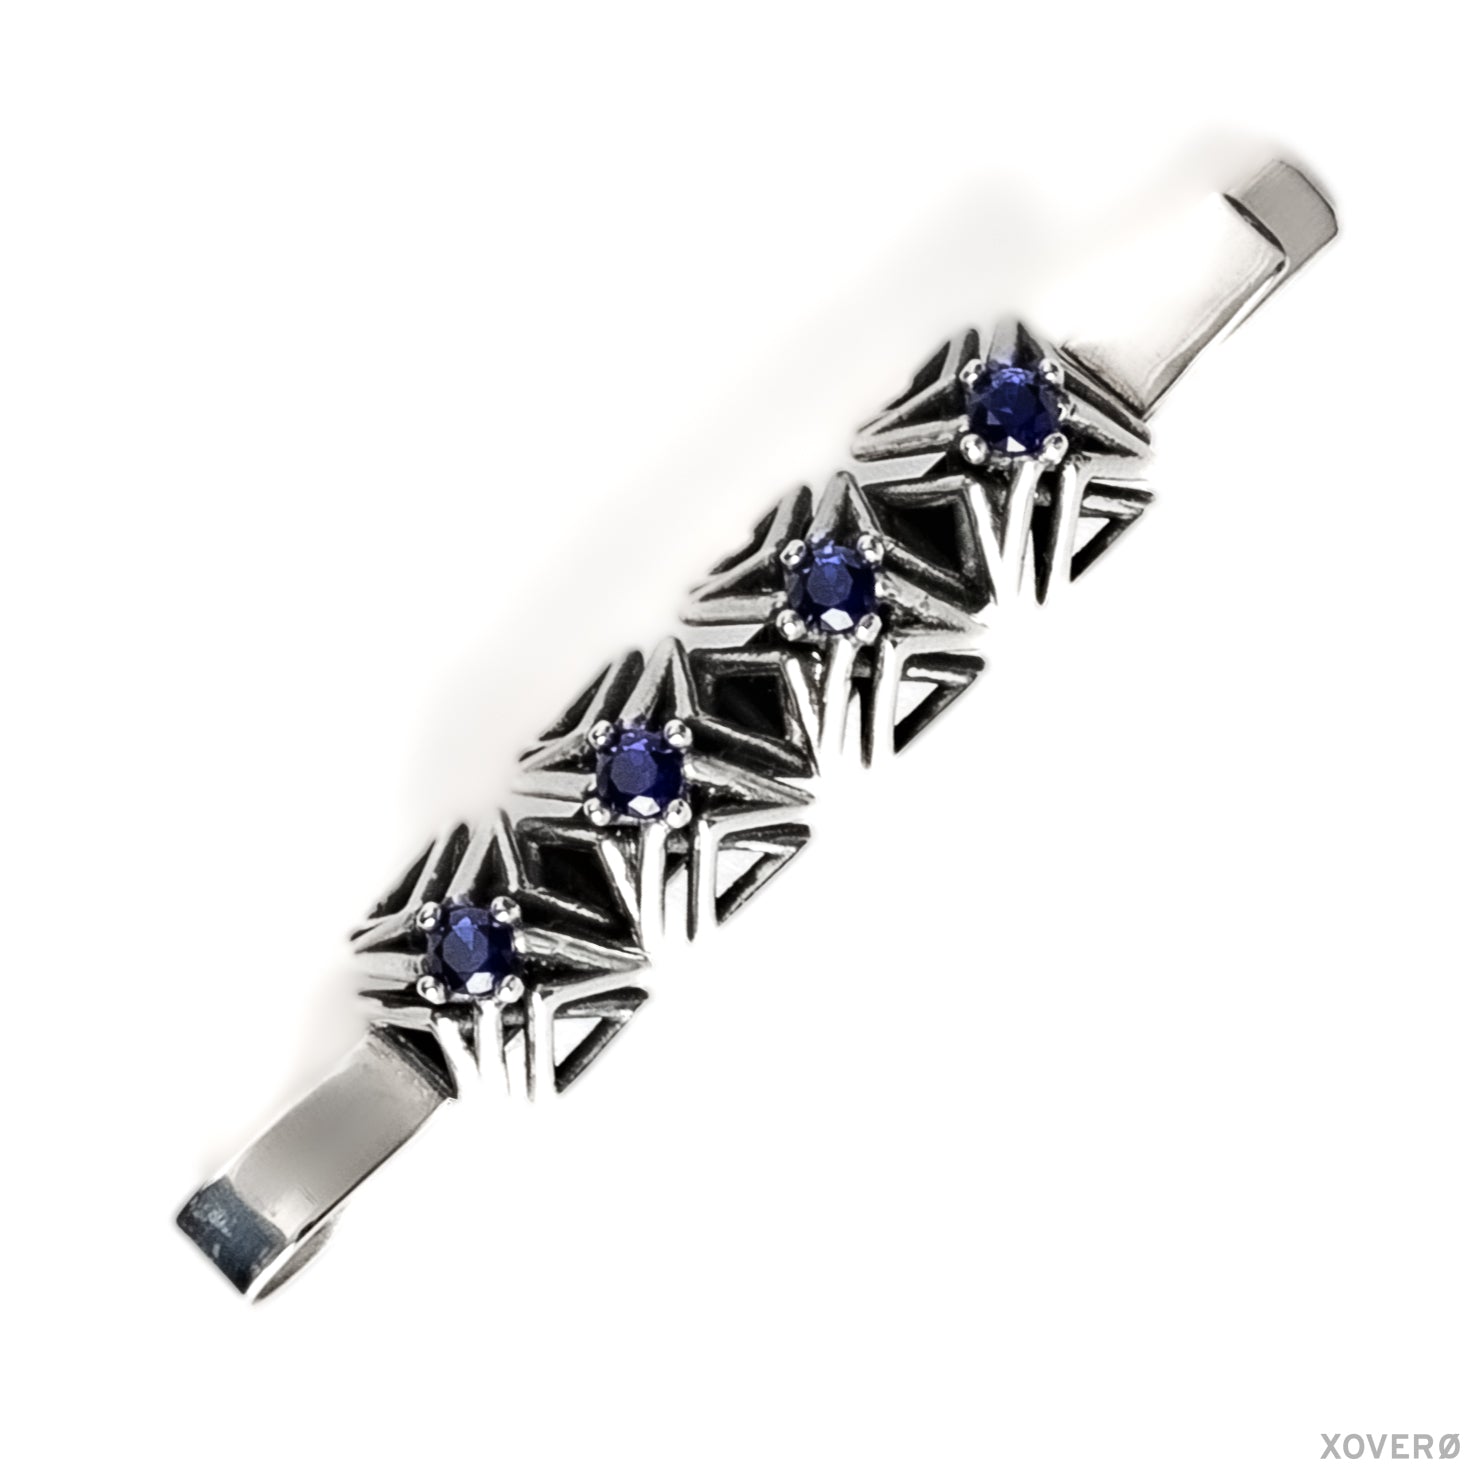 DOXOSTONE BOBBY - Bobby Pin - Sterling Silver and Sapphire